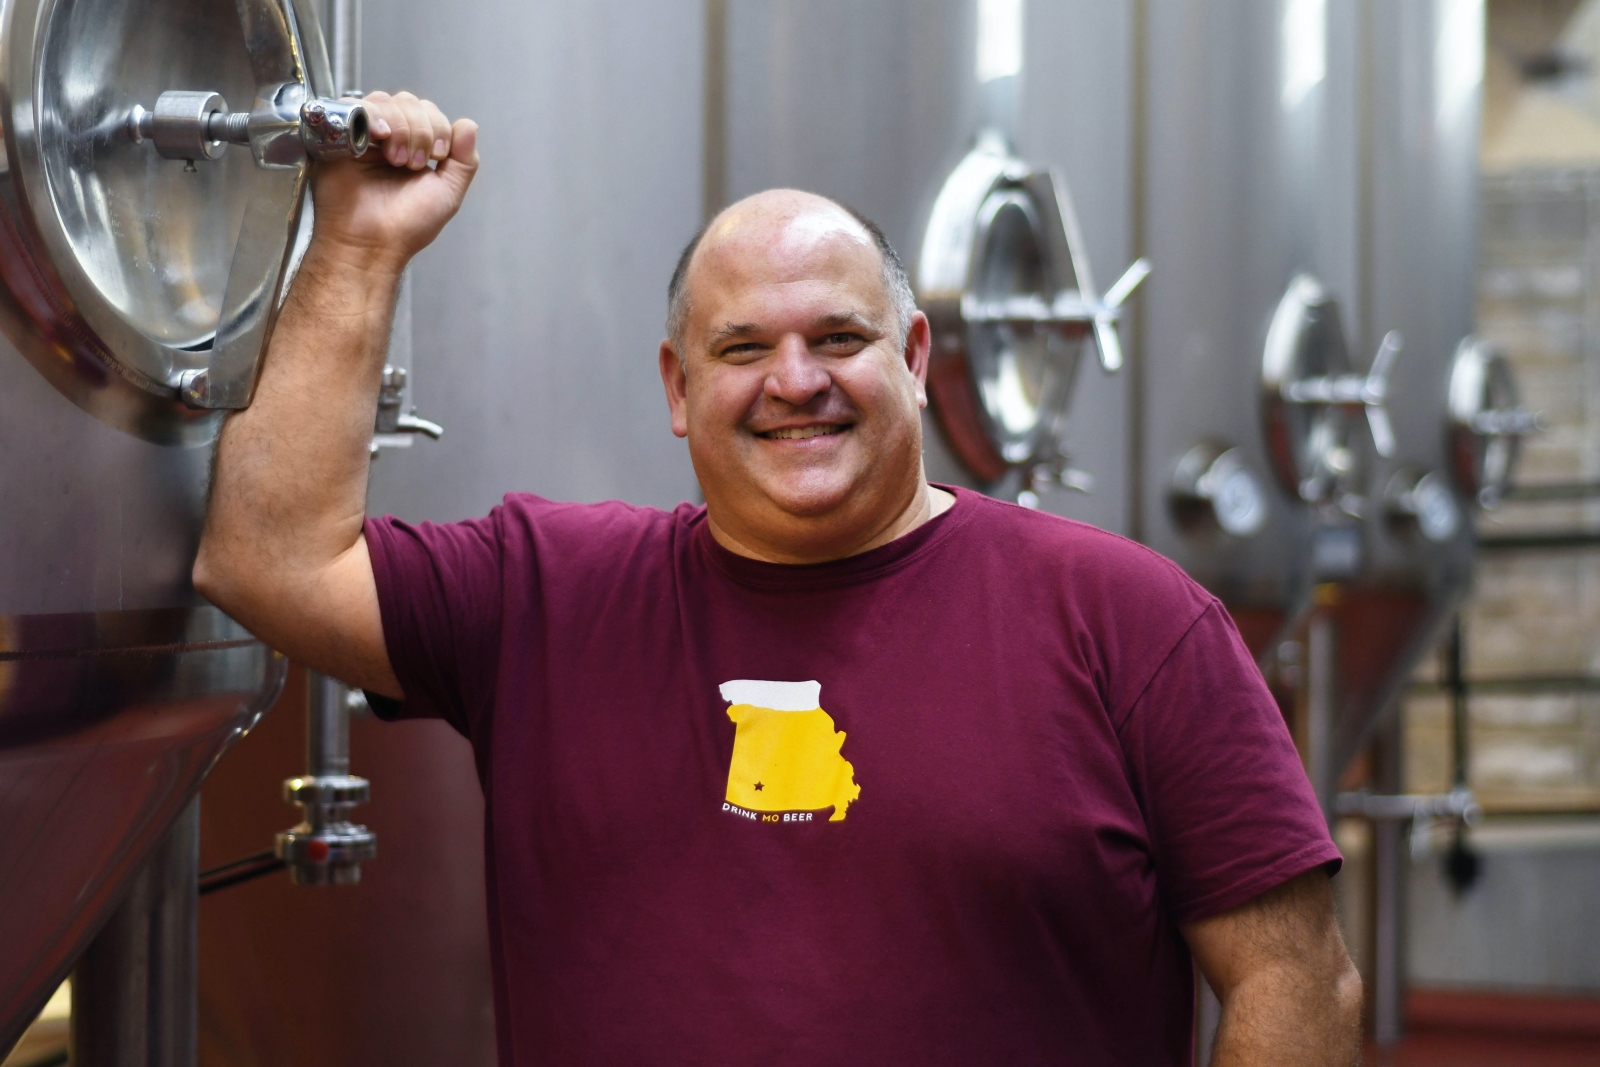 Brian Allen, wearing a maroon T-shirt, poses for a photo inside Springfield Brewing Company's brewery